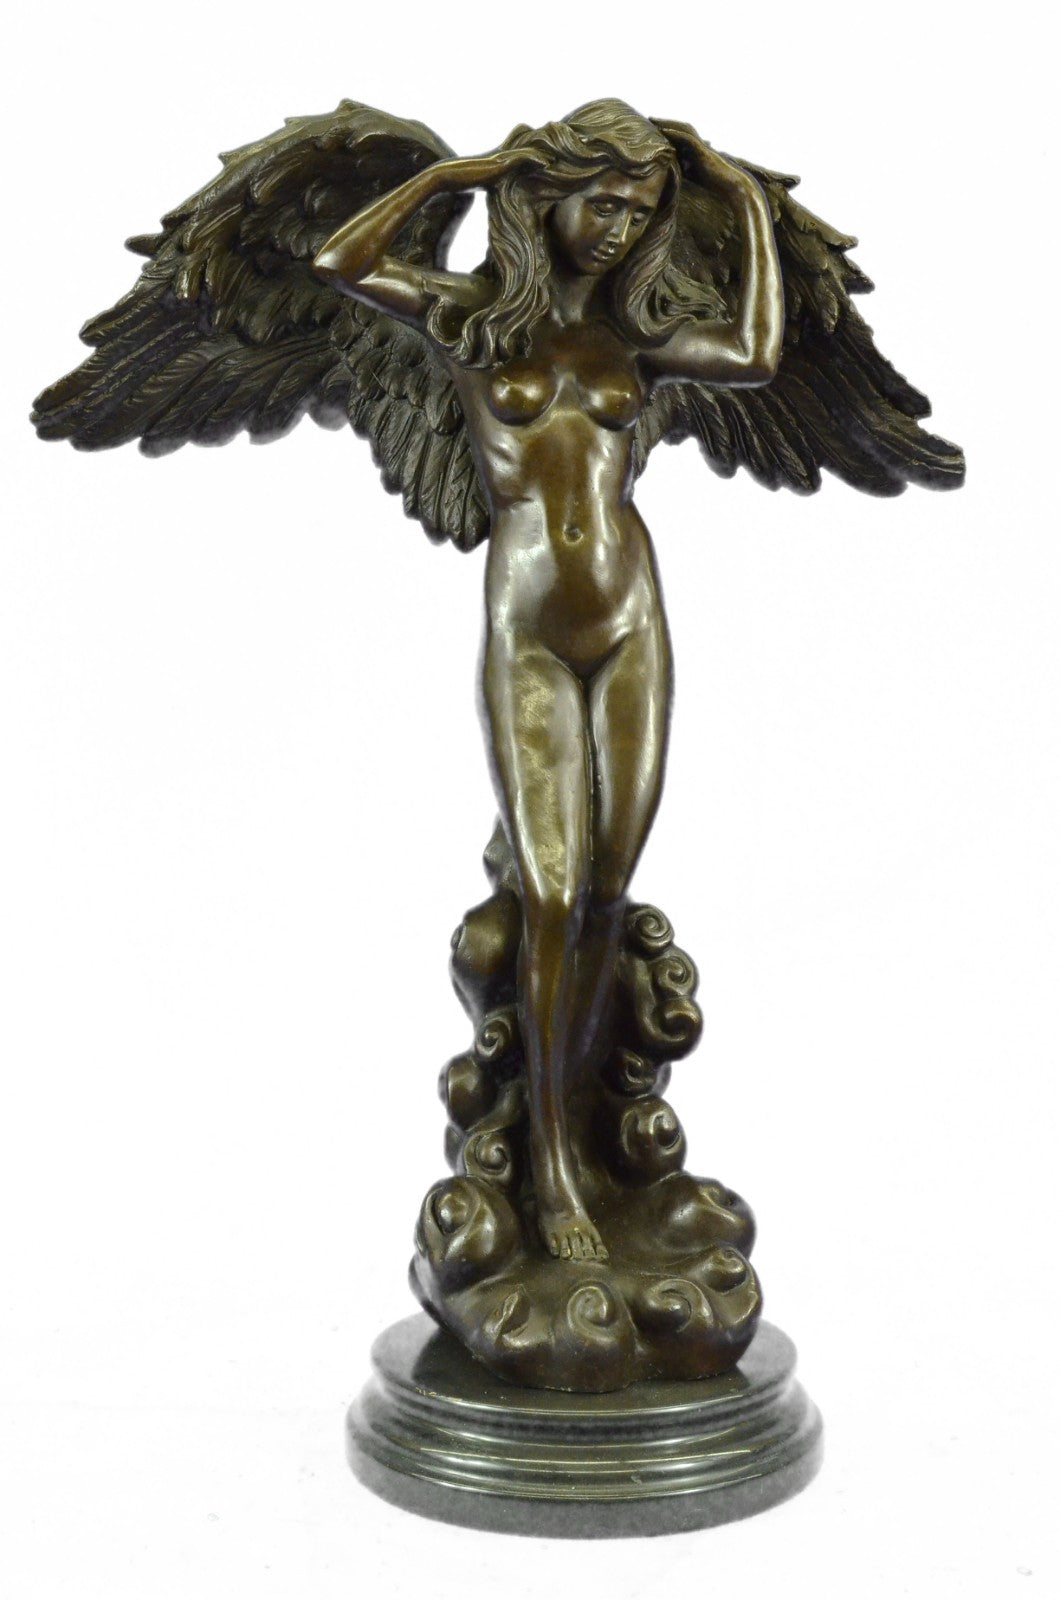 Mythical Extra Large Nude Female Angel Bronze Sculpture Classic Artwork Figure